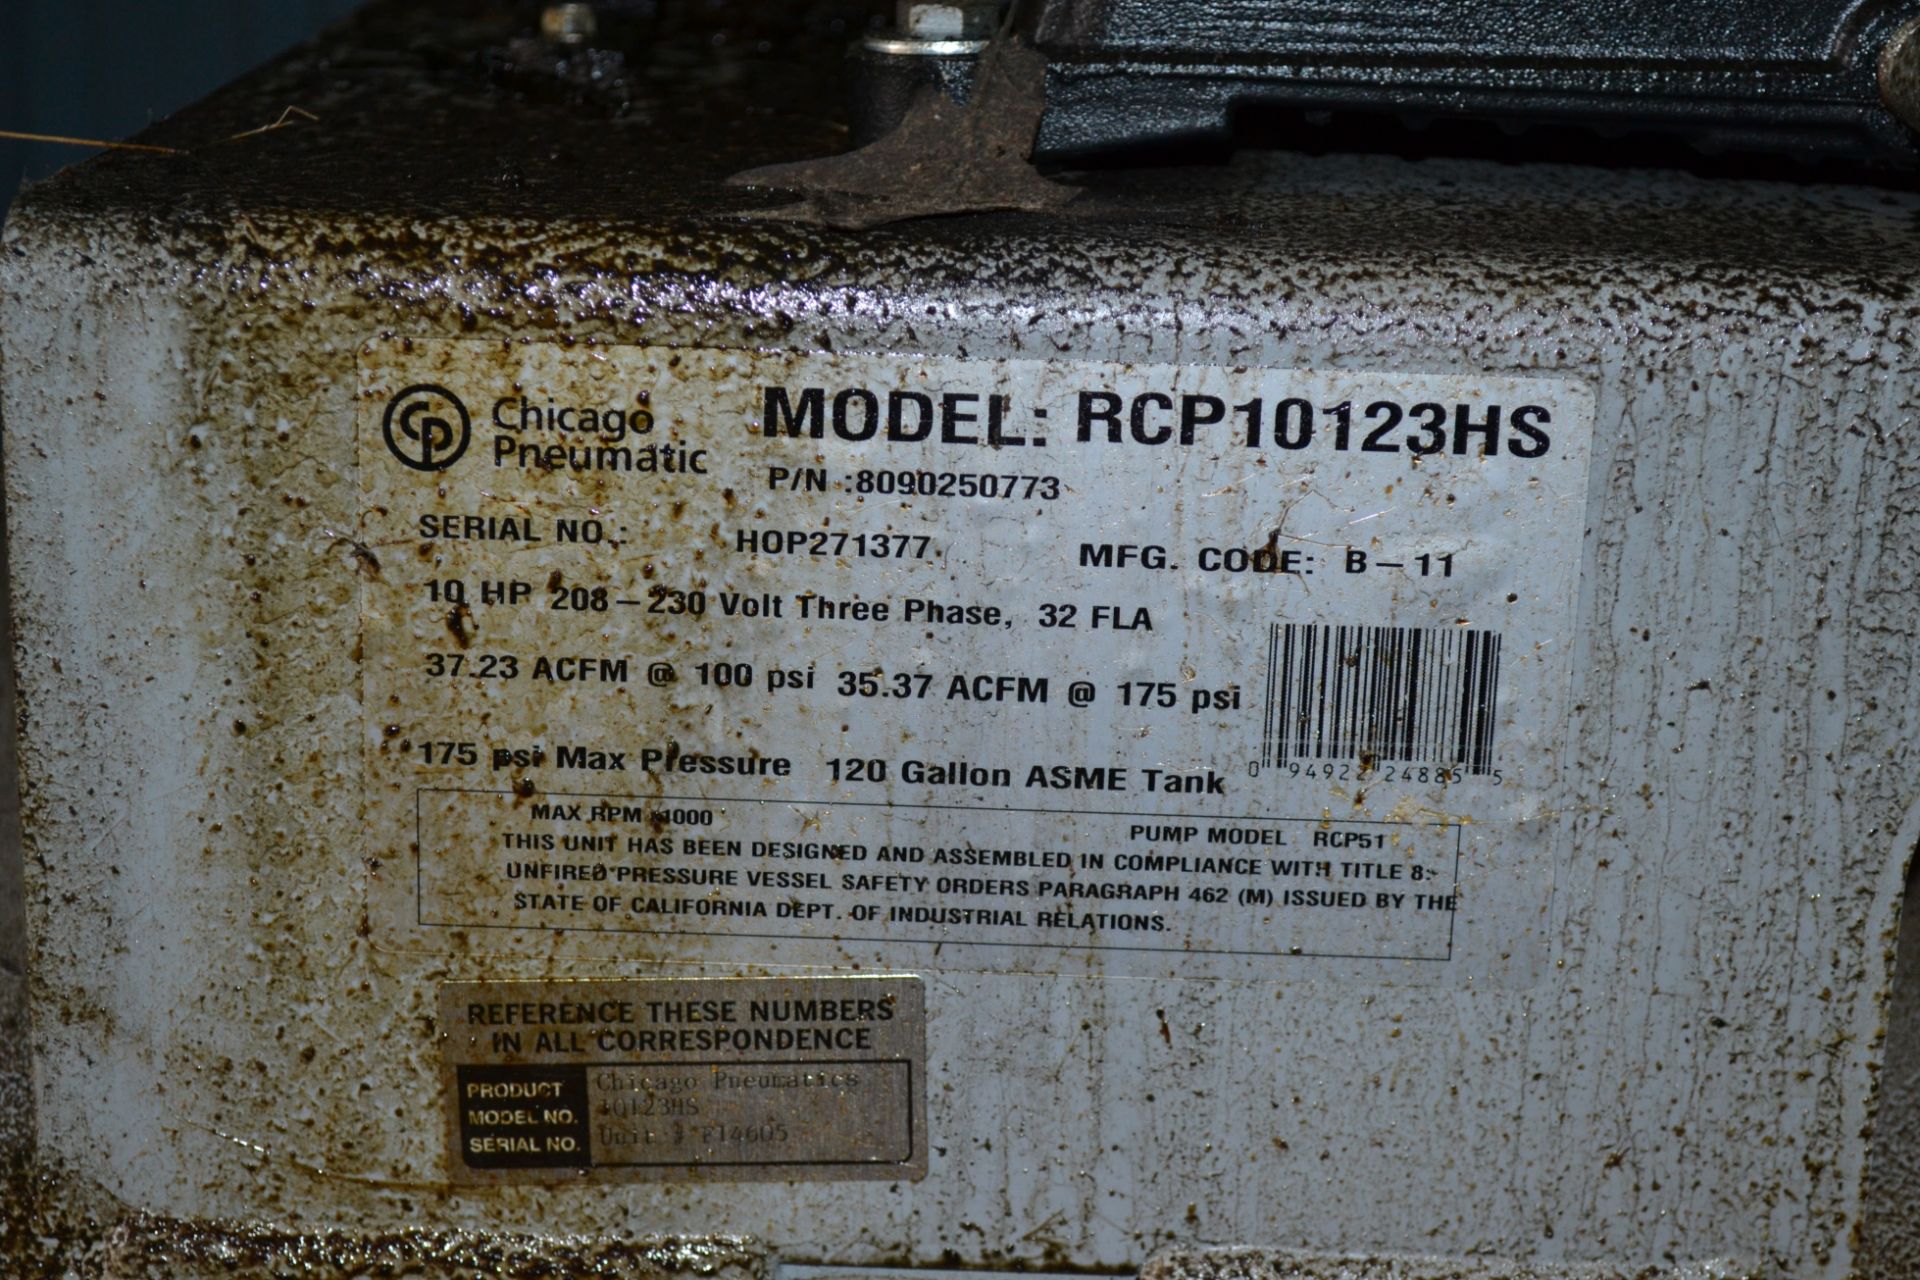 Chicago Pneumatic Model RCP10123HS 10-HP Horizontal Tank Mounted Air Compressor, S/N HOP271377, - Image 3 of 3